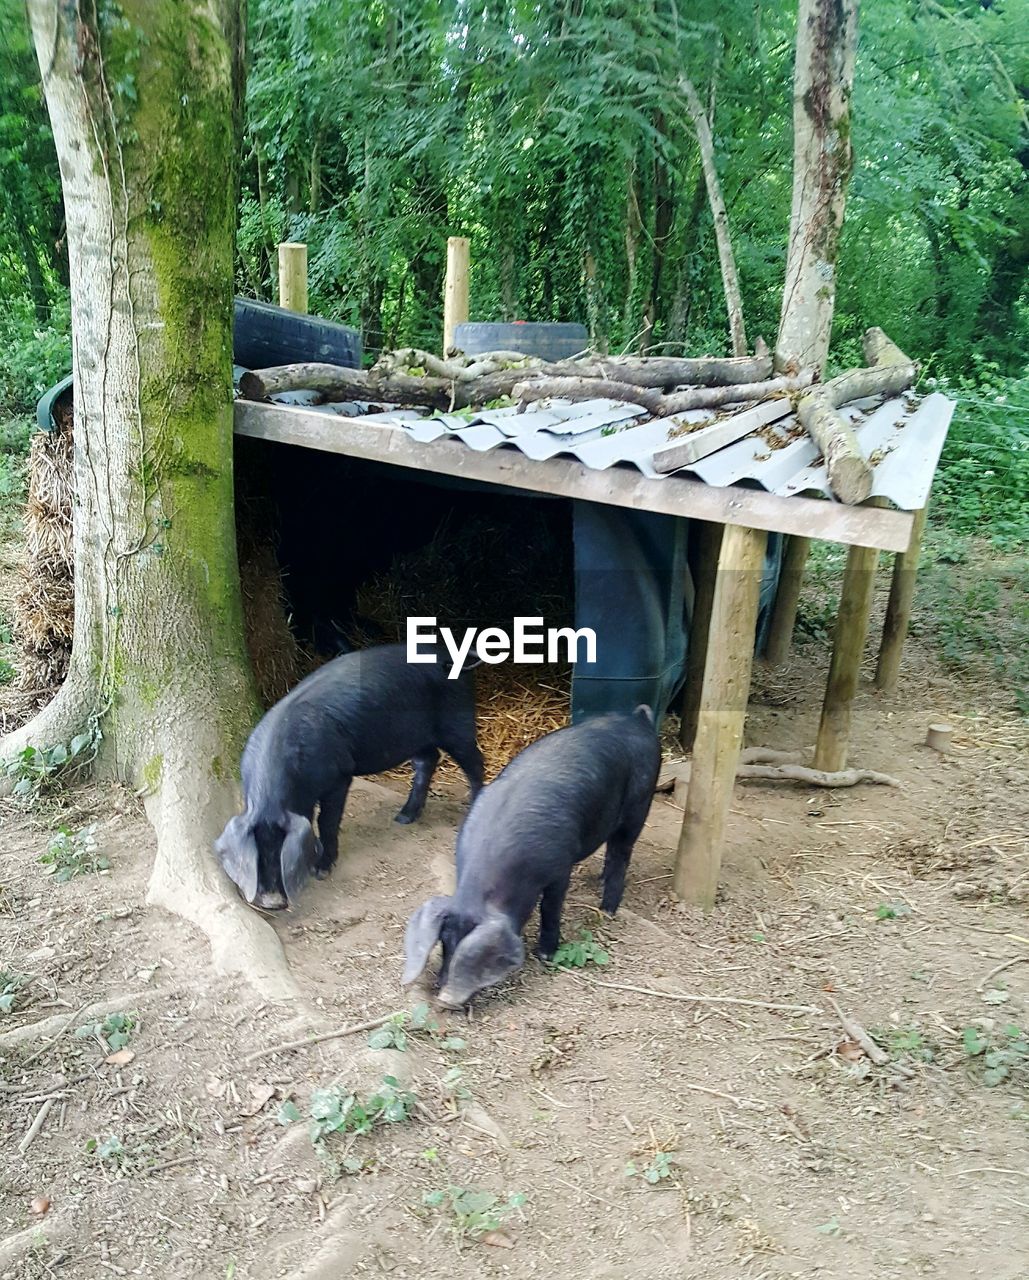 Pigs under a shelter in woodland